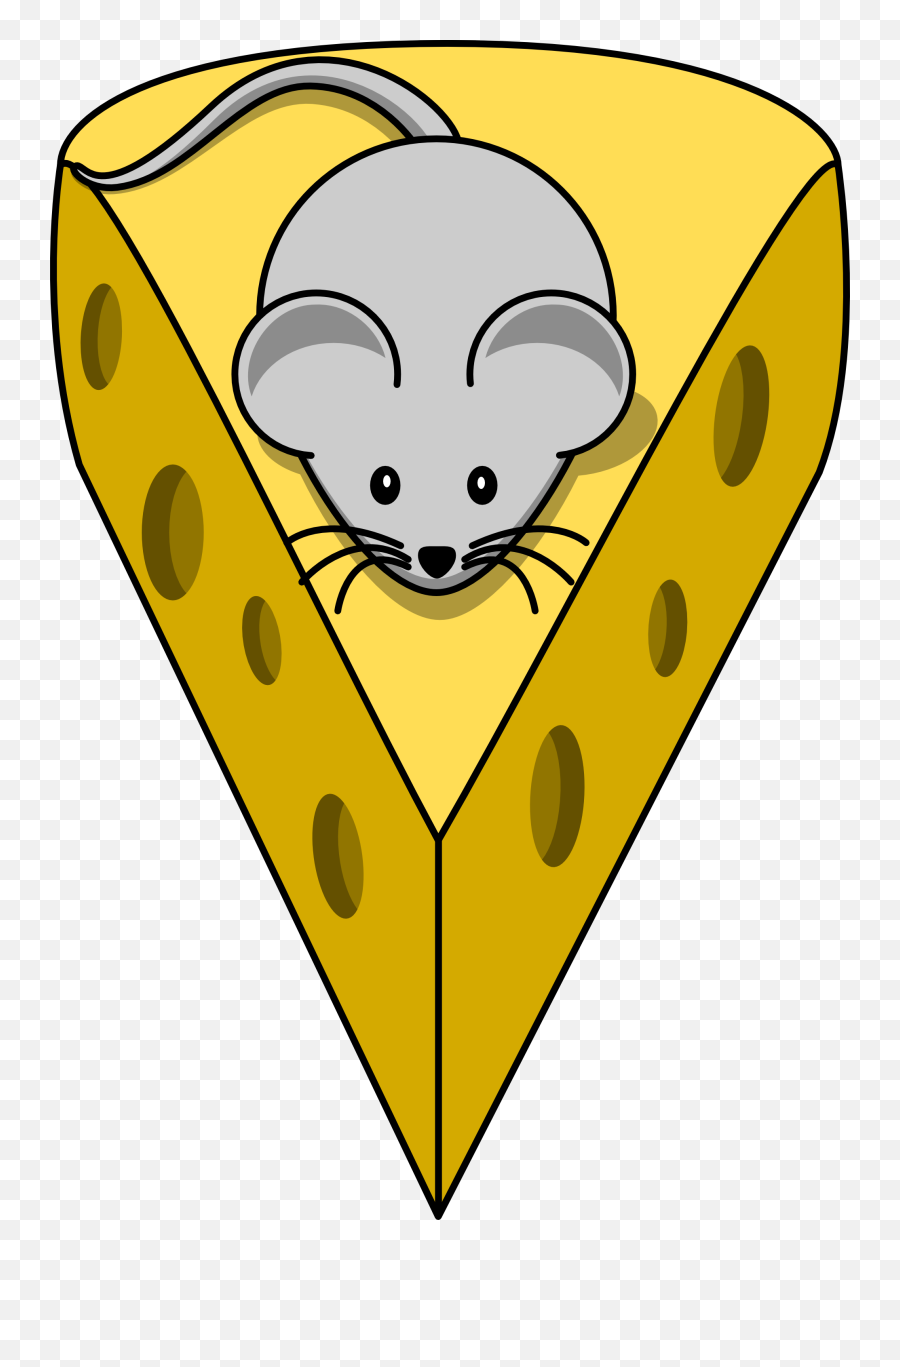 Mouse Clip Art 2 Image 11910 - Mouse On Cheese Clipart Emoji,Mouse Clipart